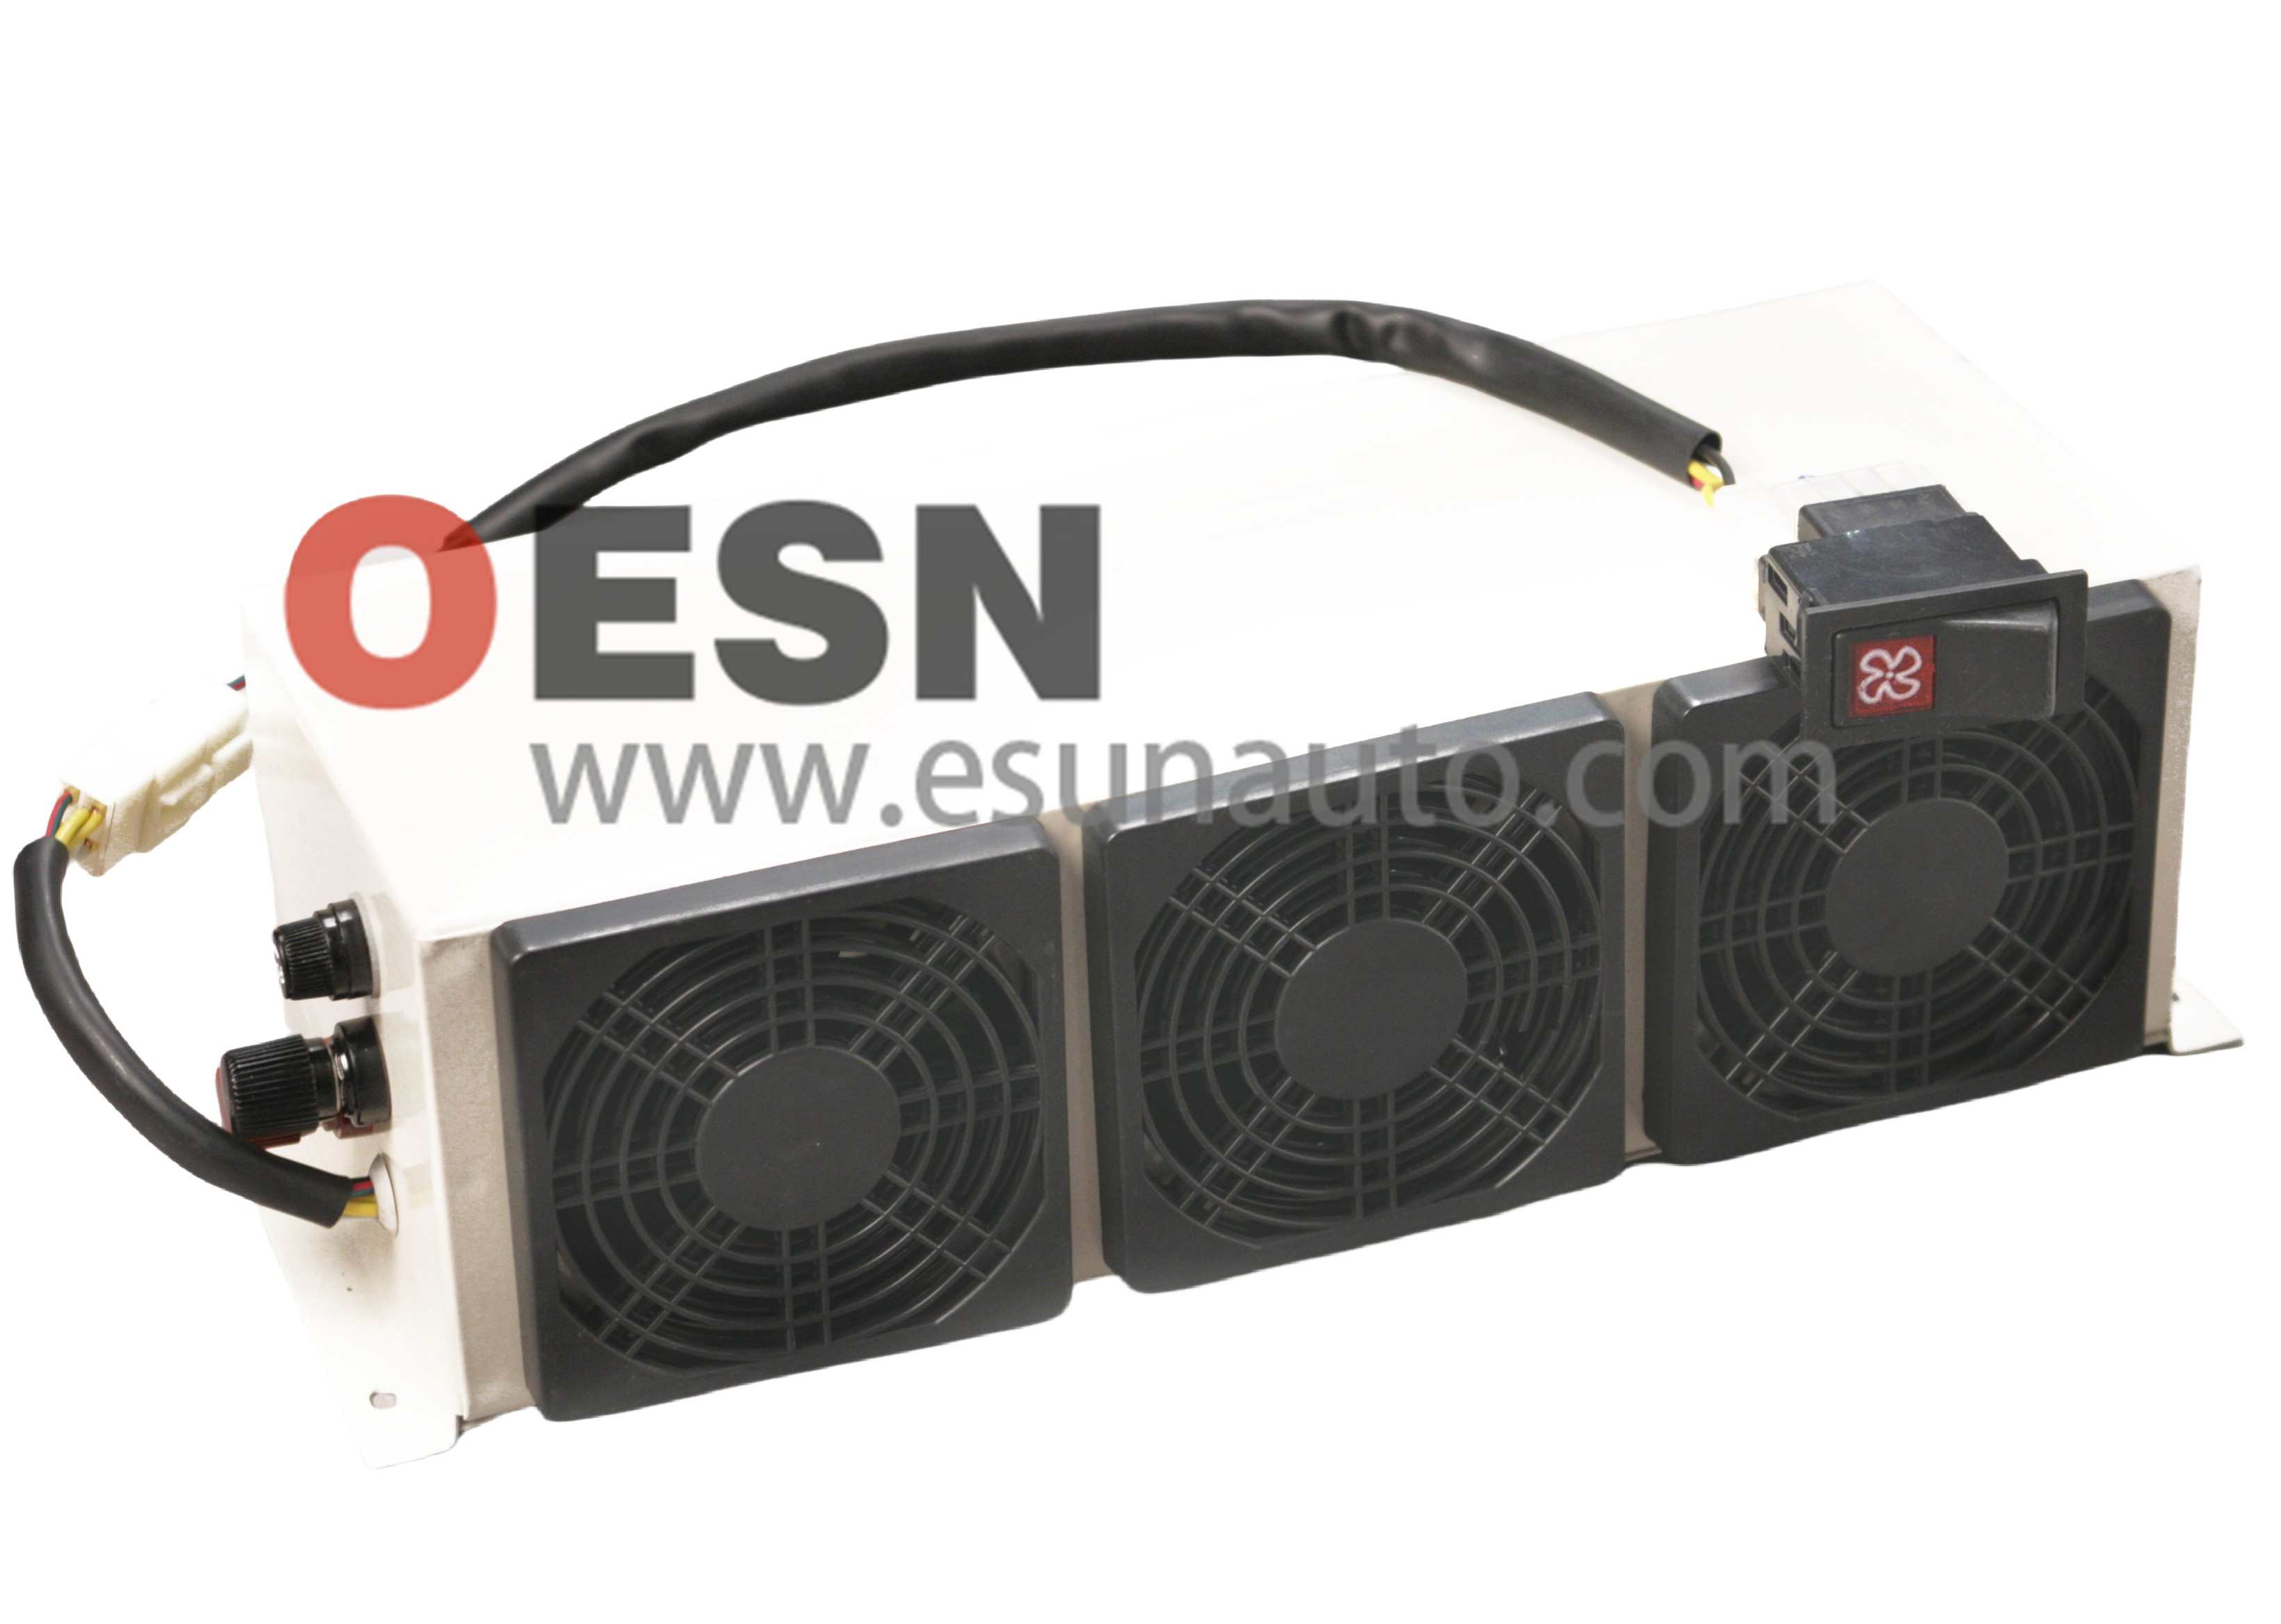 Additional cabin heater (electrical) ESN30013